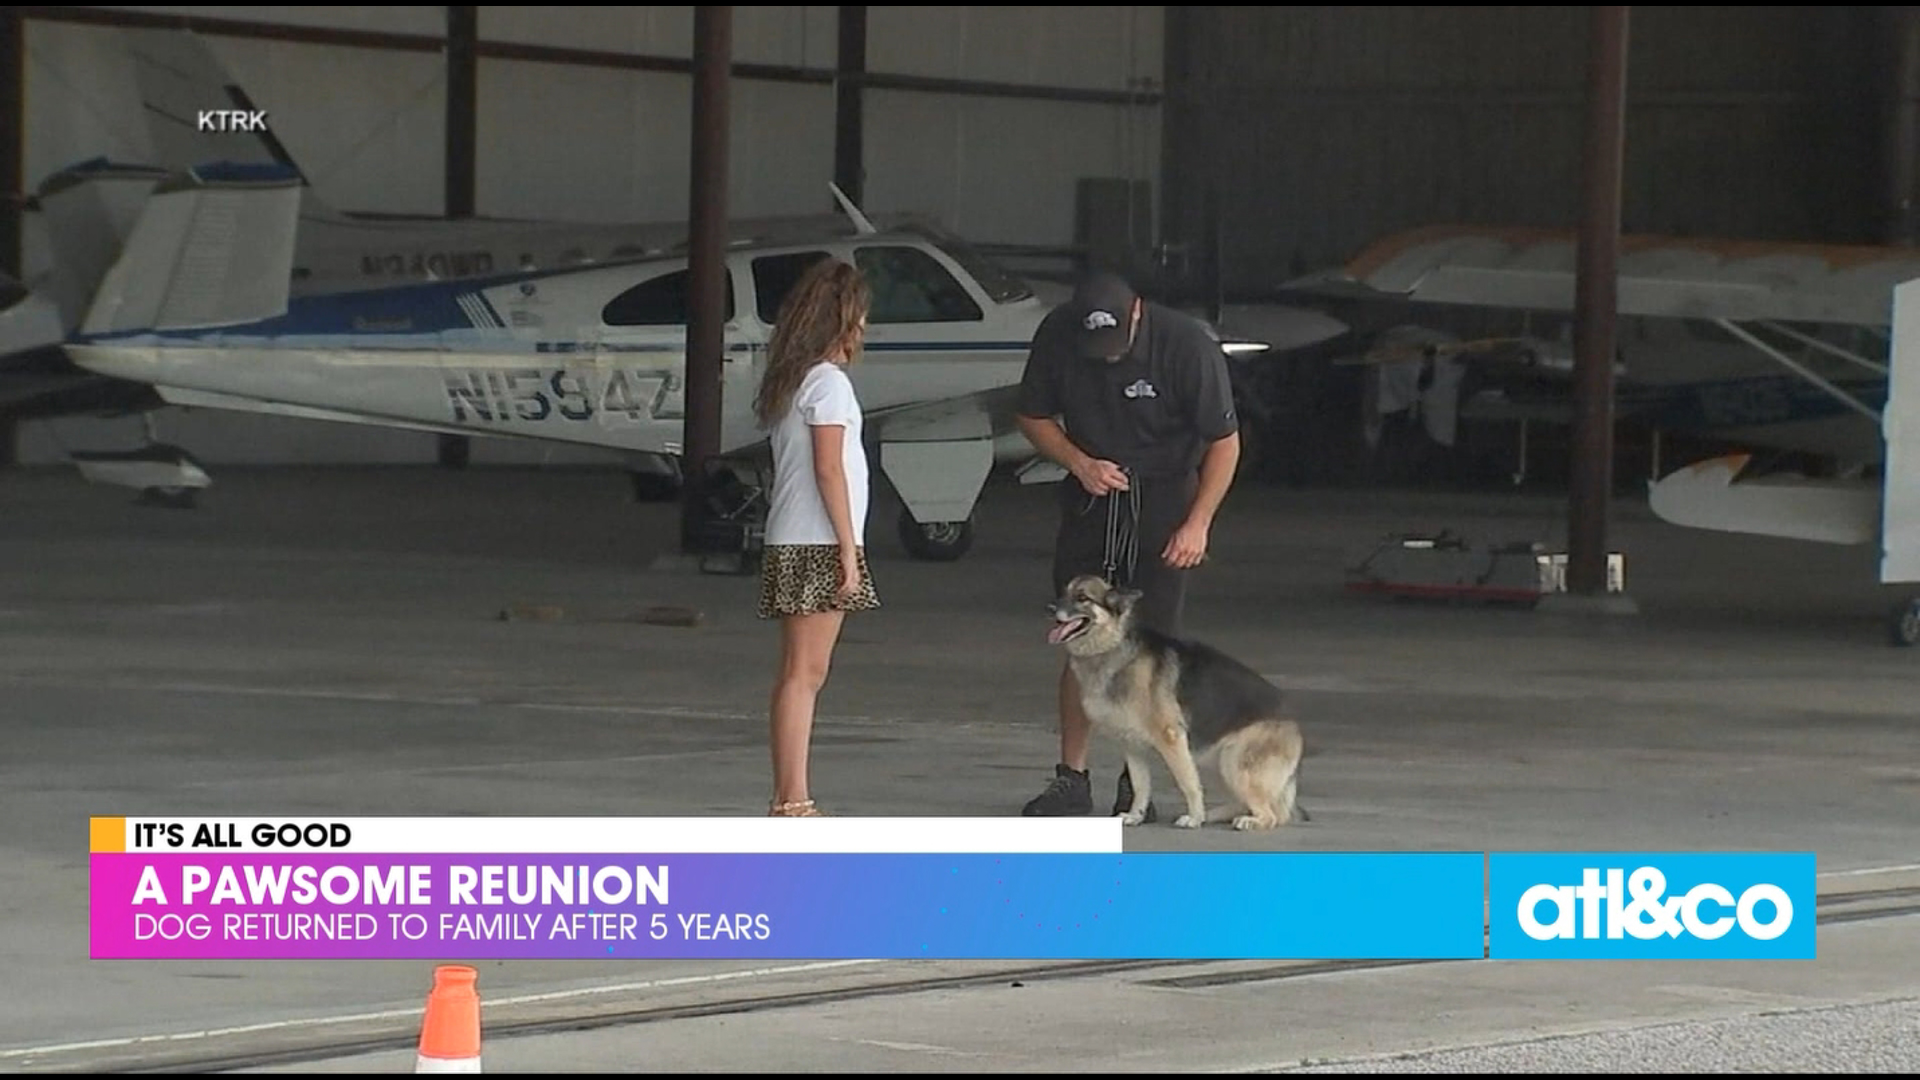 What a reunion! A German shepherd named Sheba returned home after nearly 5 years away.